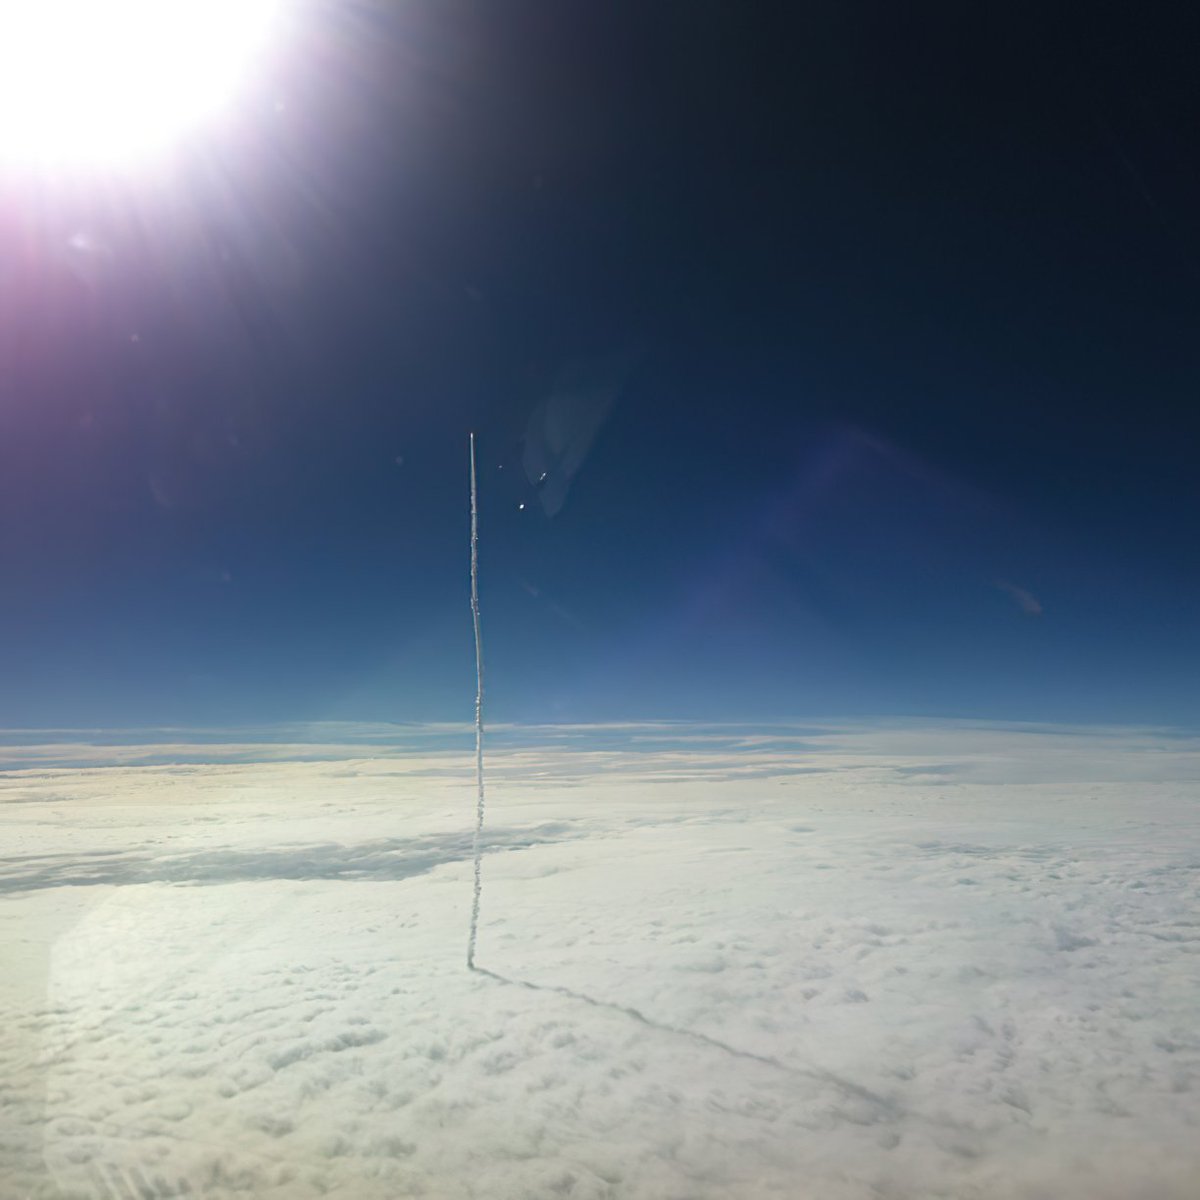 Rocket leaving Earth as seen from an airplane window. Credit: Tarynface/imgur bit.ly/3aQev4T